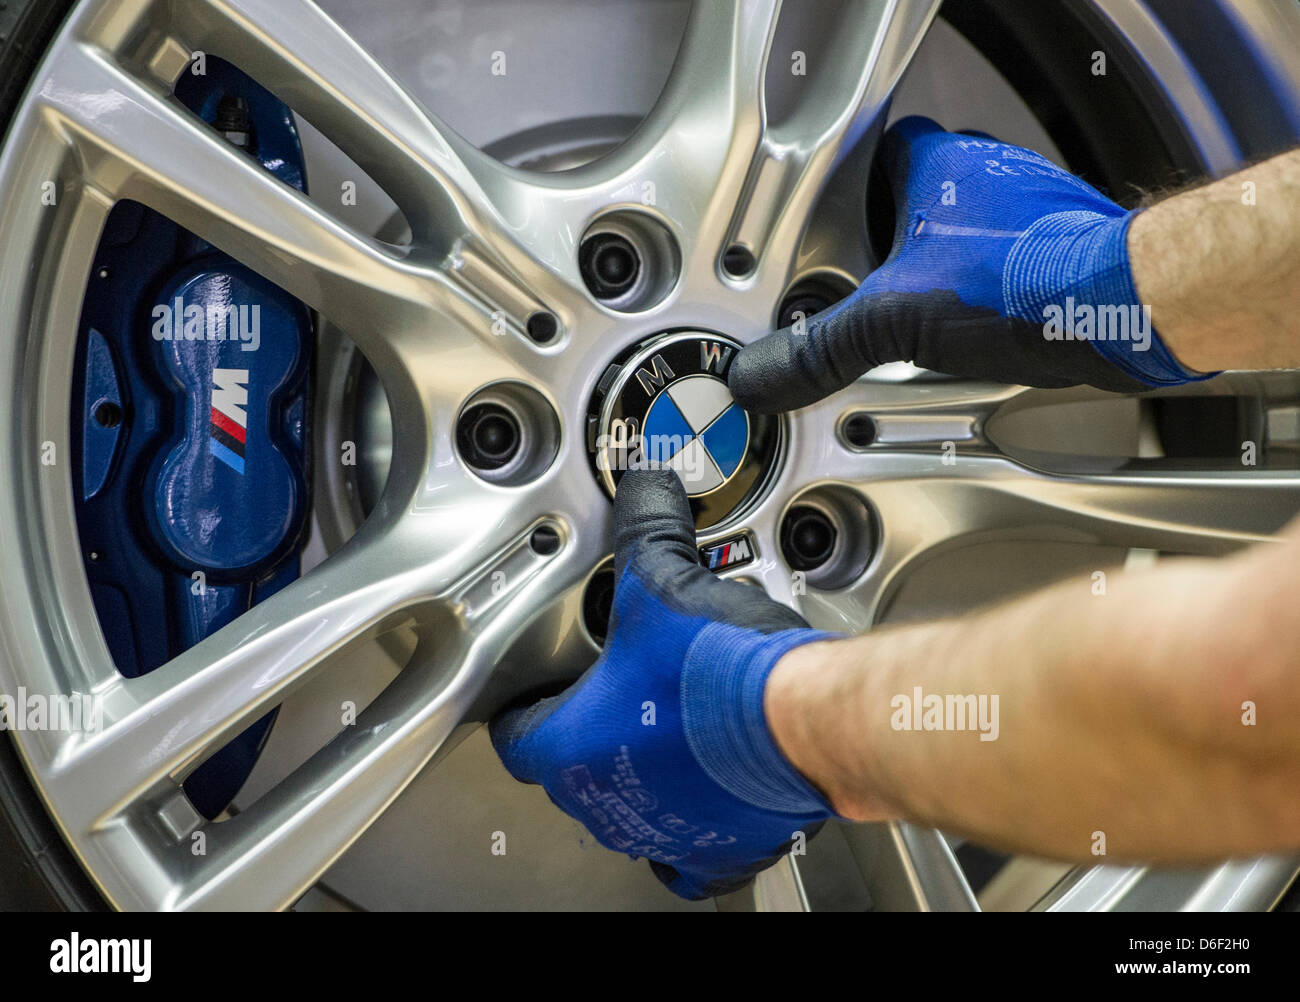 An employee of car manufacturer BMW works on a car at the BMW factory in Regensburg, Germany, 10 April 2013. Photo: Marc Mueller Stock Photo